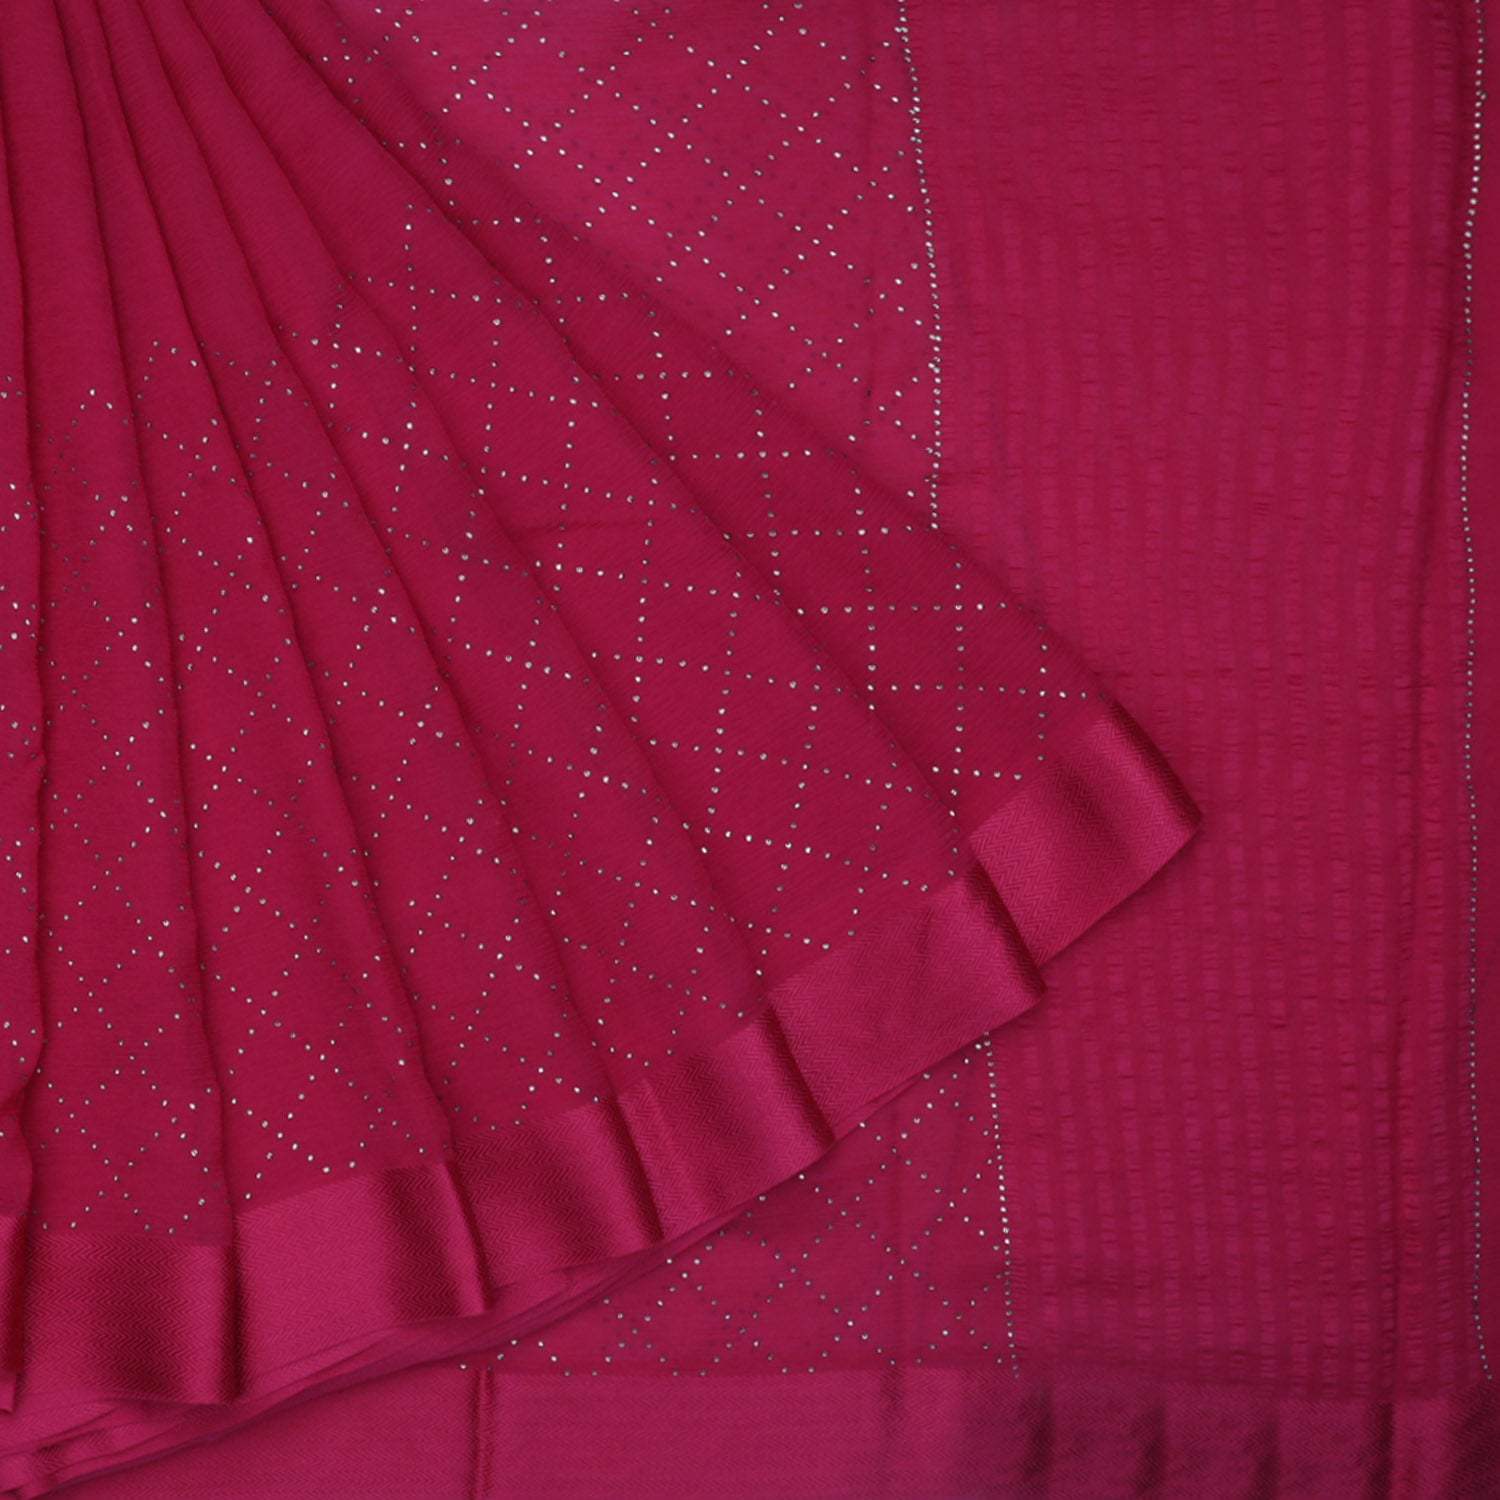 Pink Chiffon Saree With Stone Embroidery - Singhania's